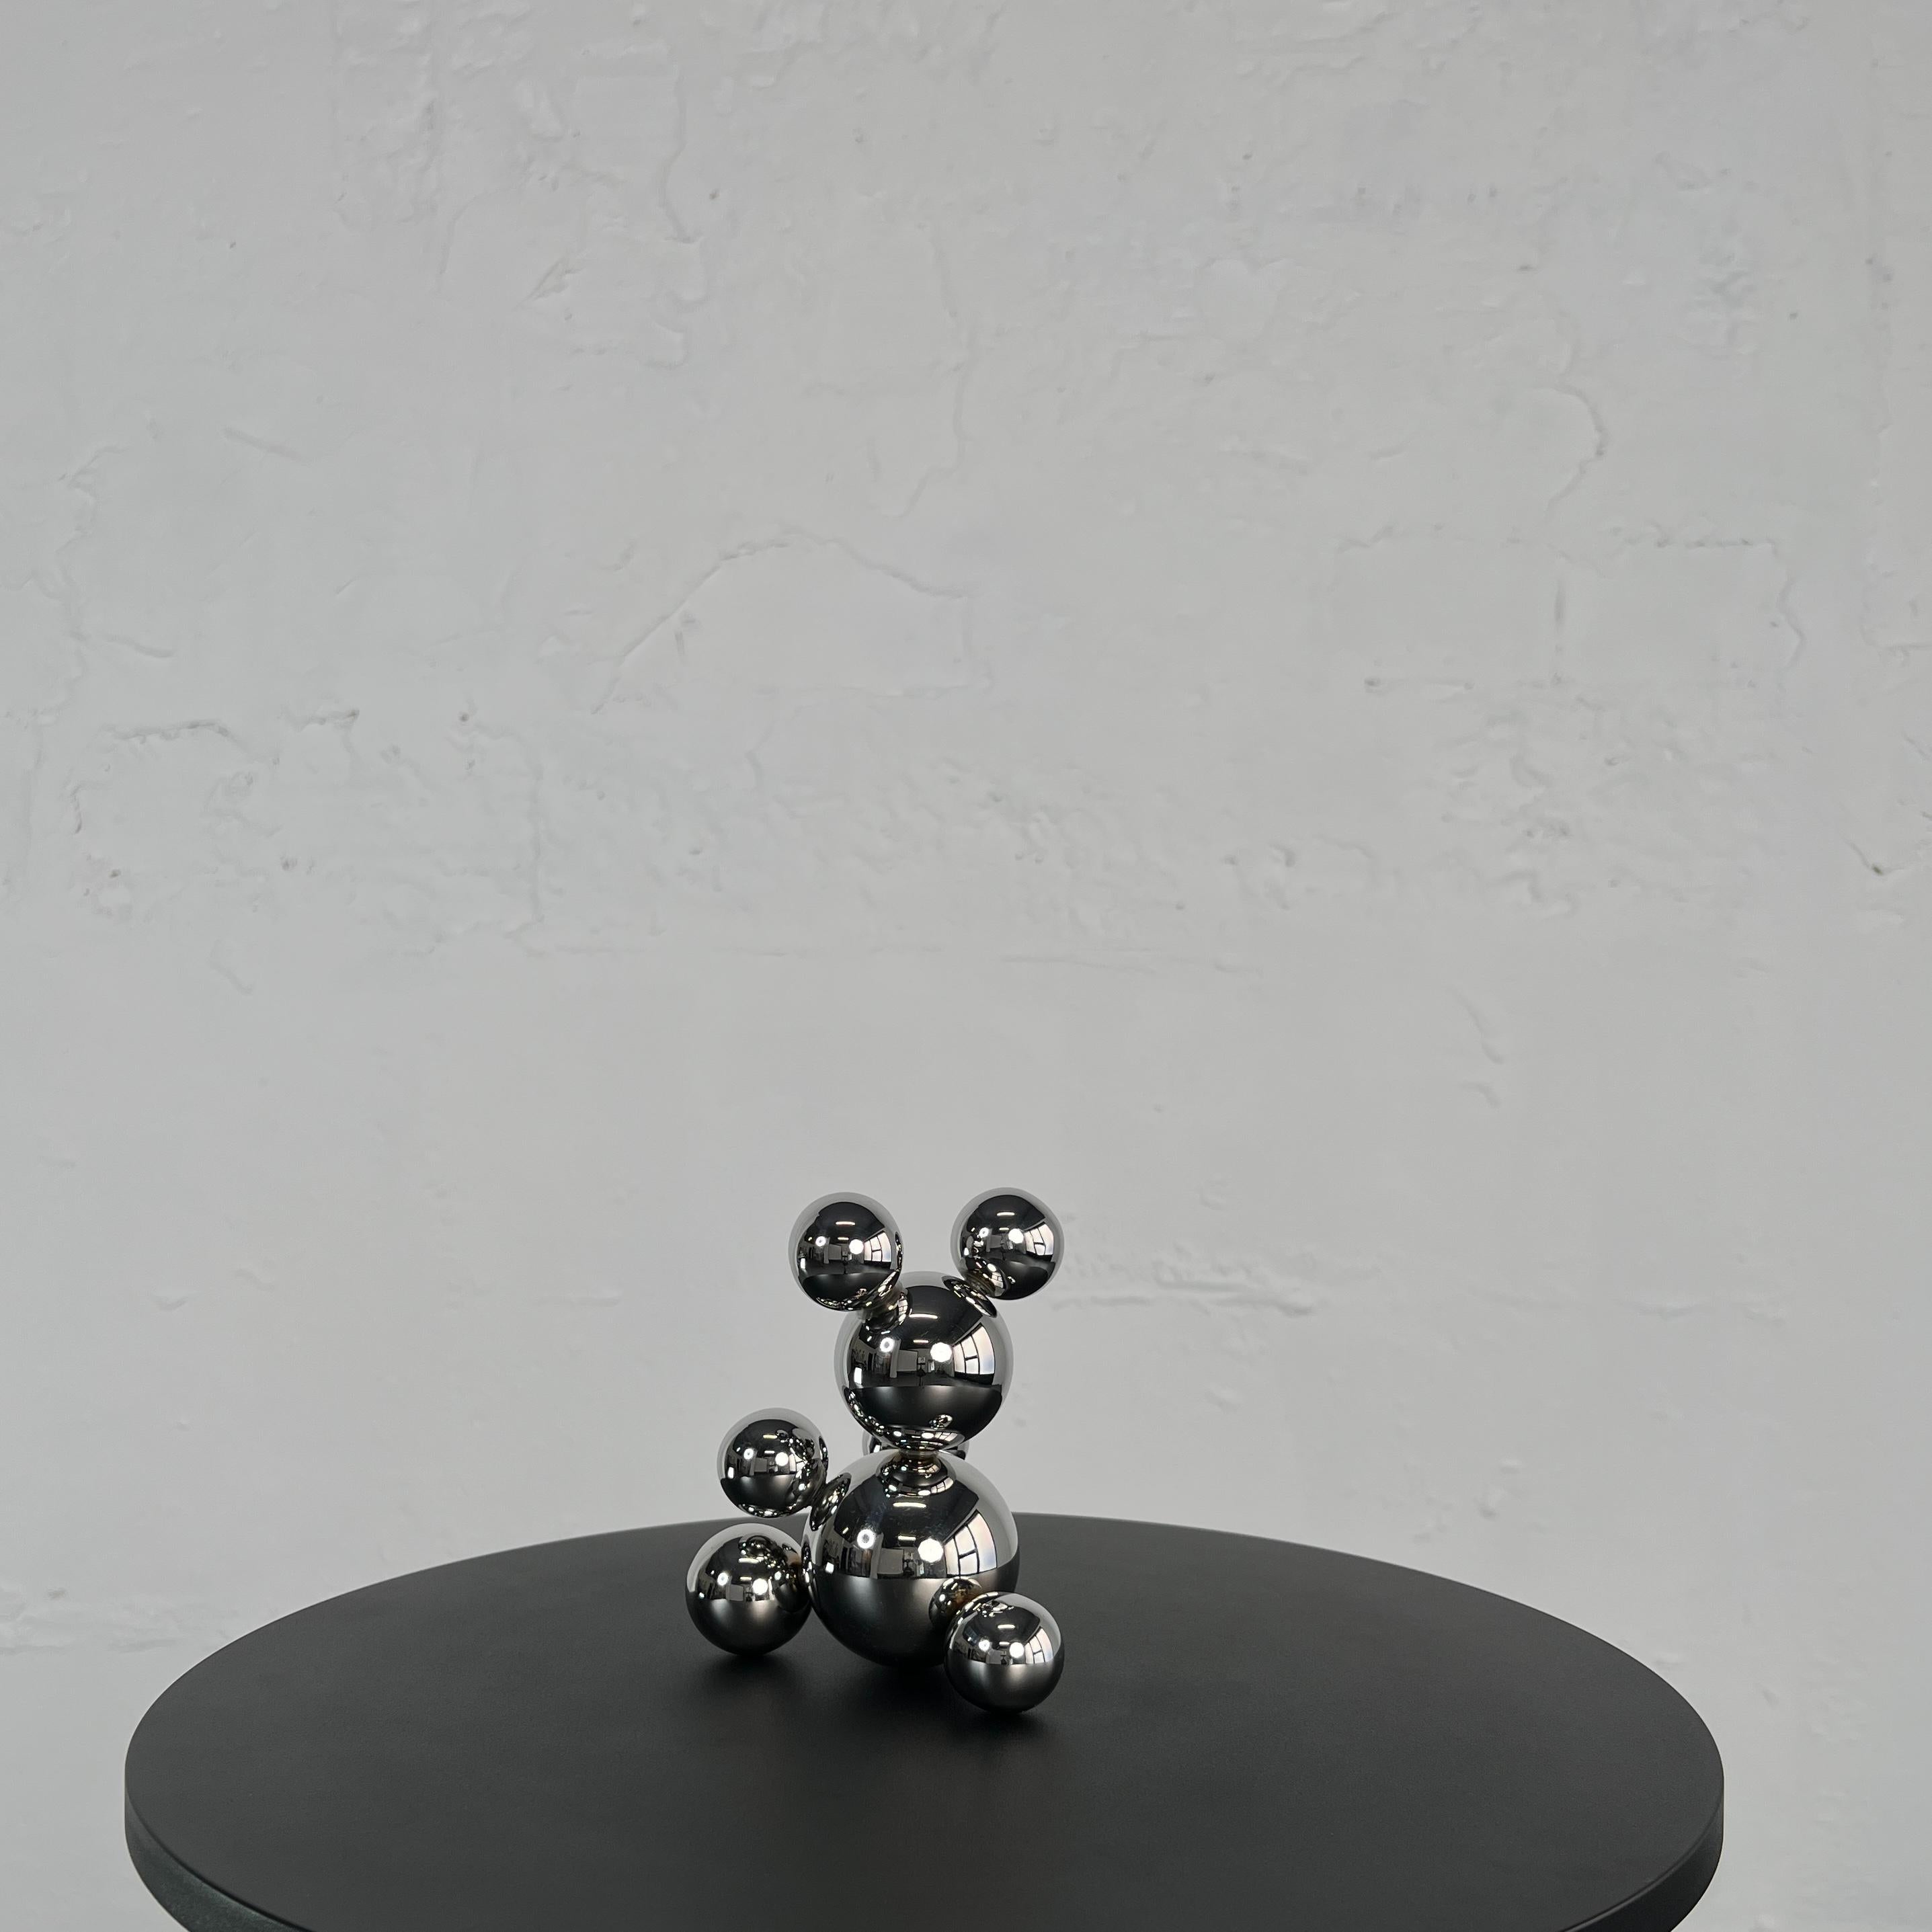 Tiny Stainless Steel Bear 'Ricky' Sculpture Minimalistic Animal For Sale 3